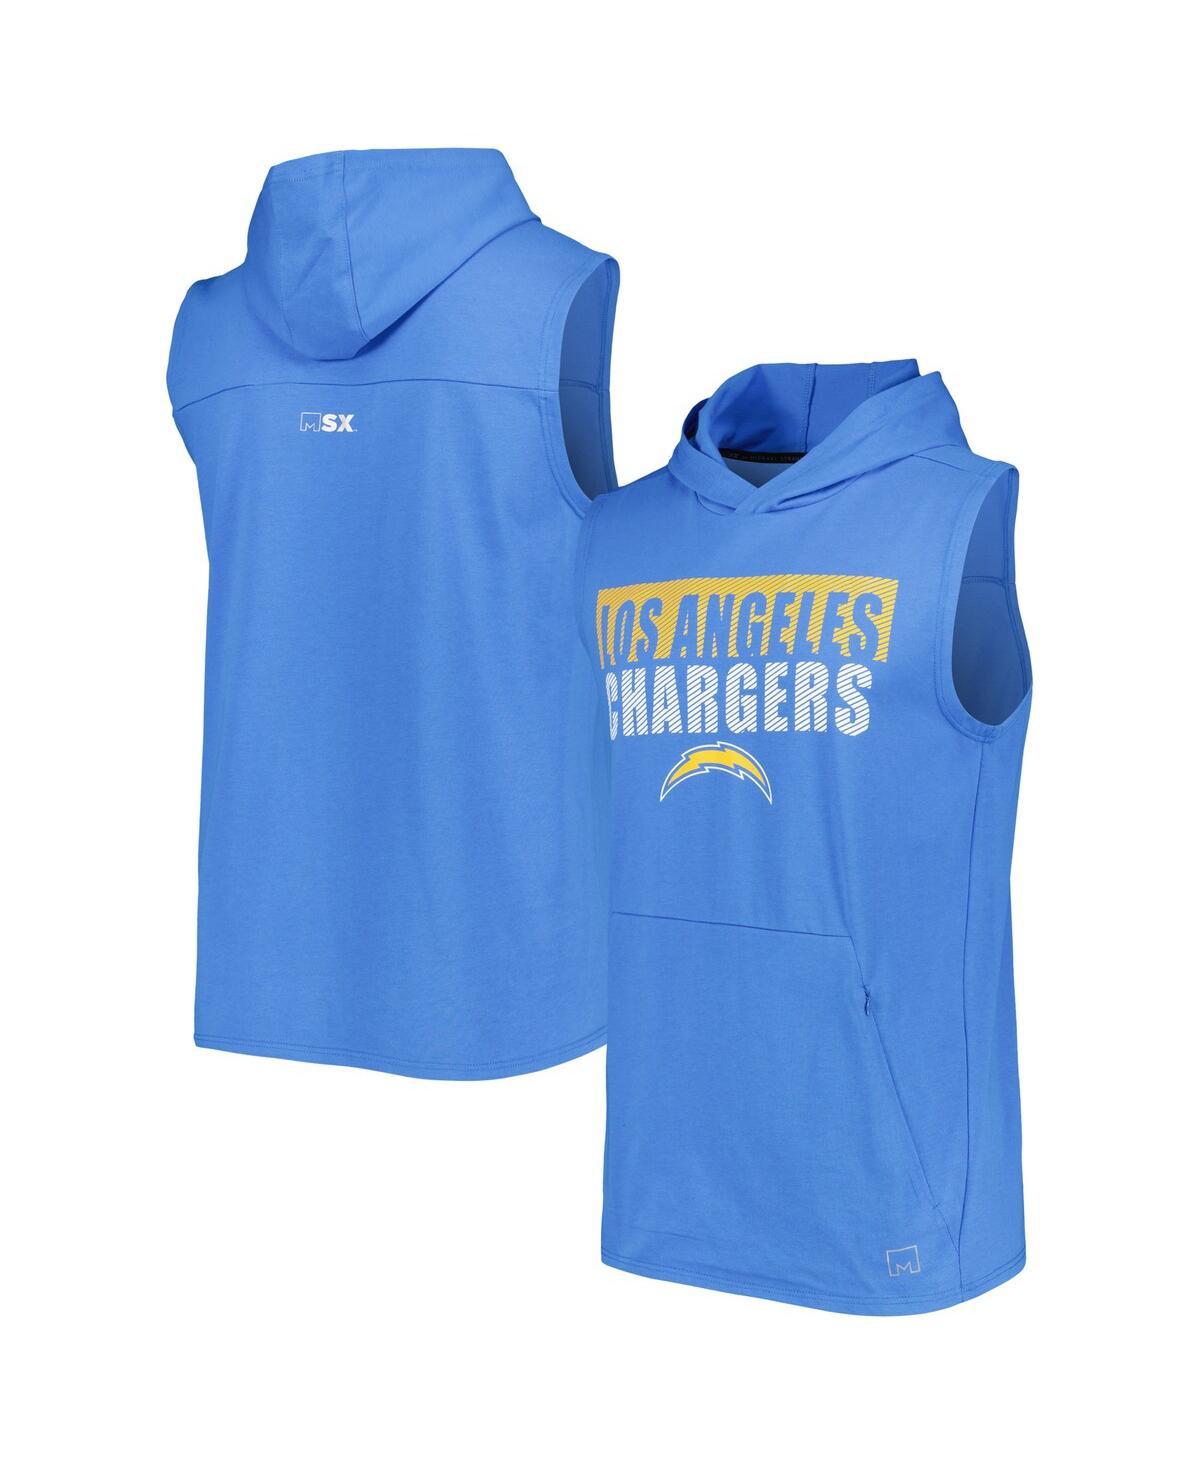 Msx By Michael Strahan Men's  Powder Blue Los Angeles Chargers Relay Sleeveless Pullover Hoodie